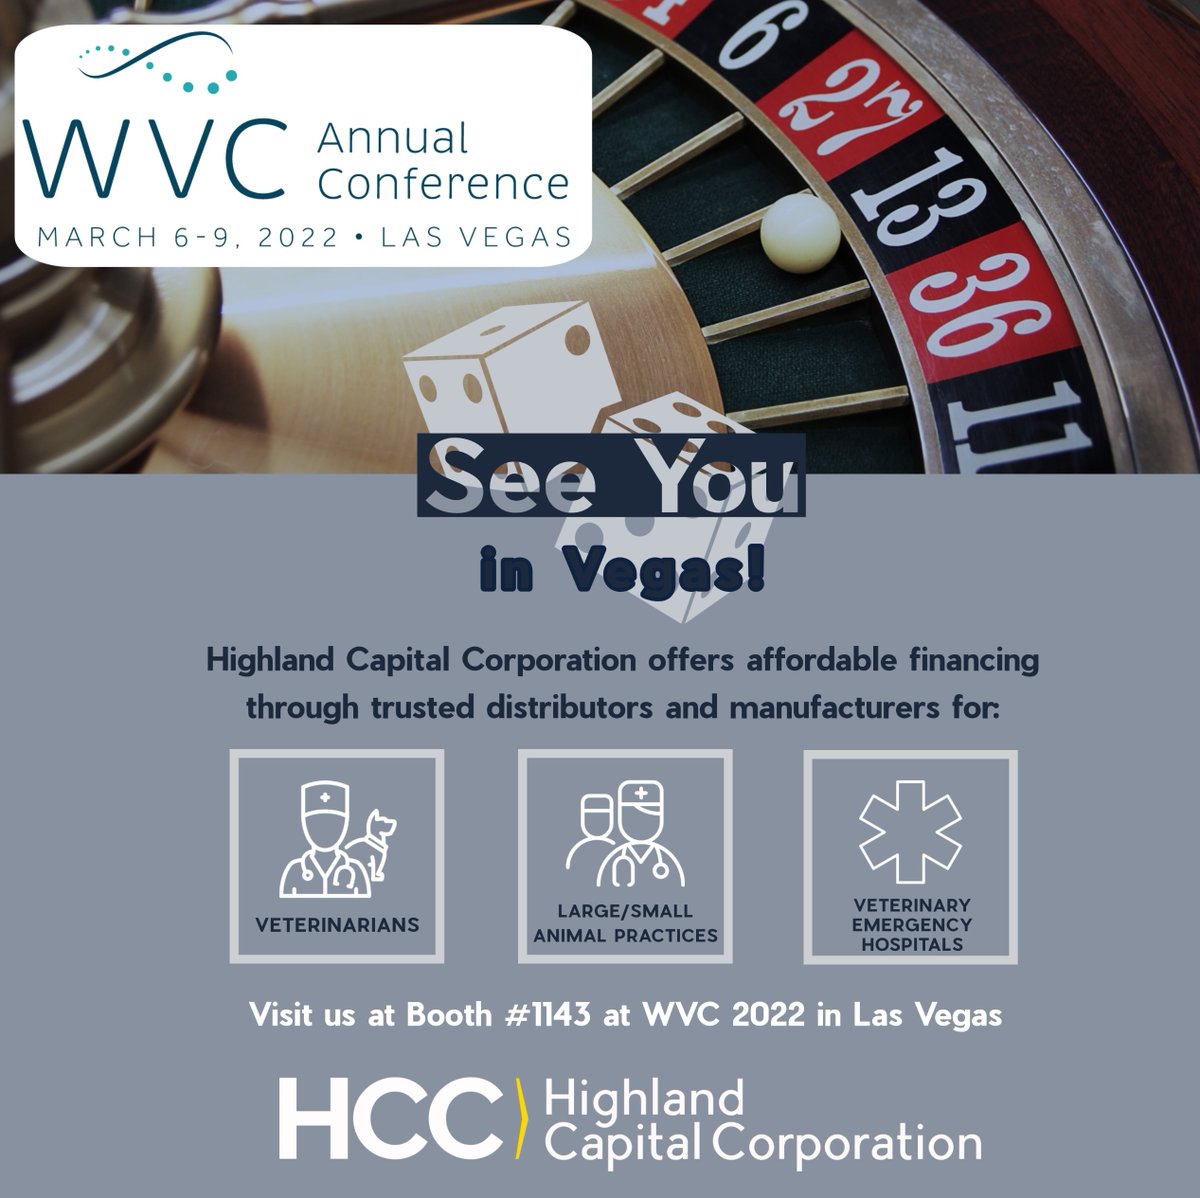 One Month until #WVC2022 Come visit us at the #westernveterinaryconference in #LasVegas  #HighlandCapitalCorporation will be at booth 1143 #equipmentfinancing #equipmentleasing #veterinarian #vetmed bit.ly/3gxC9FF